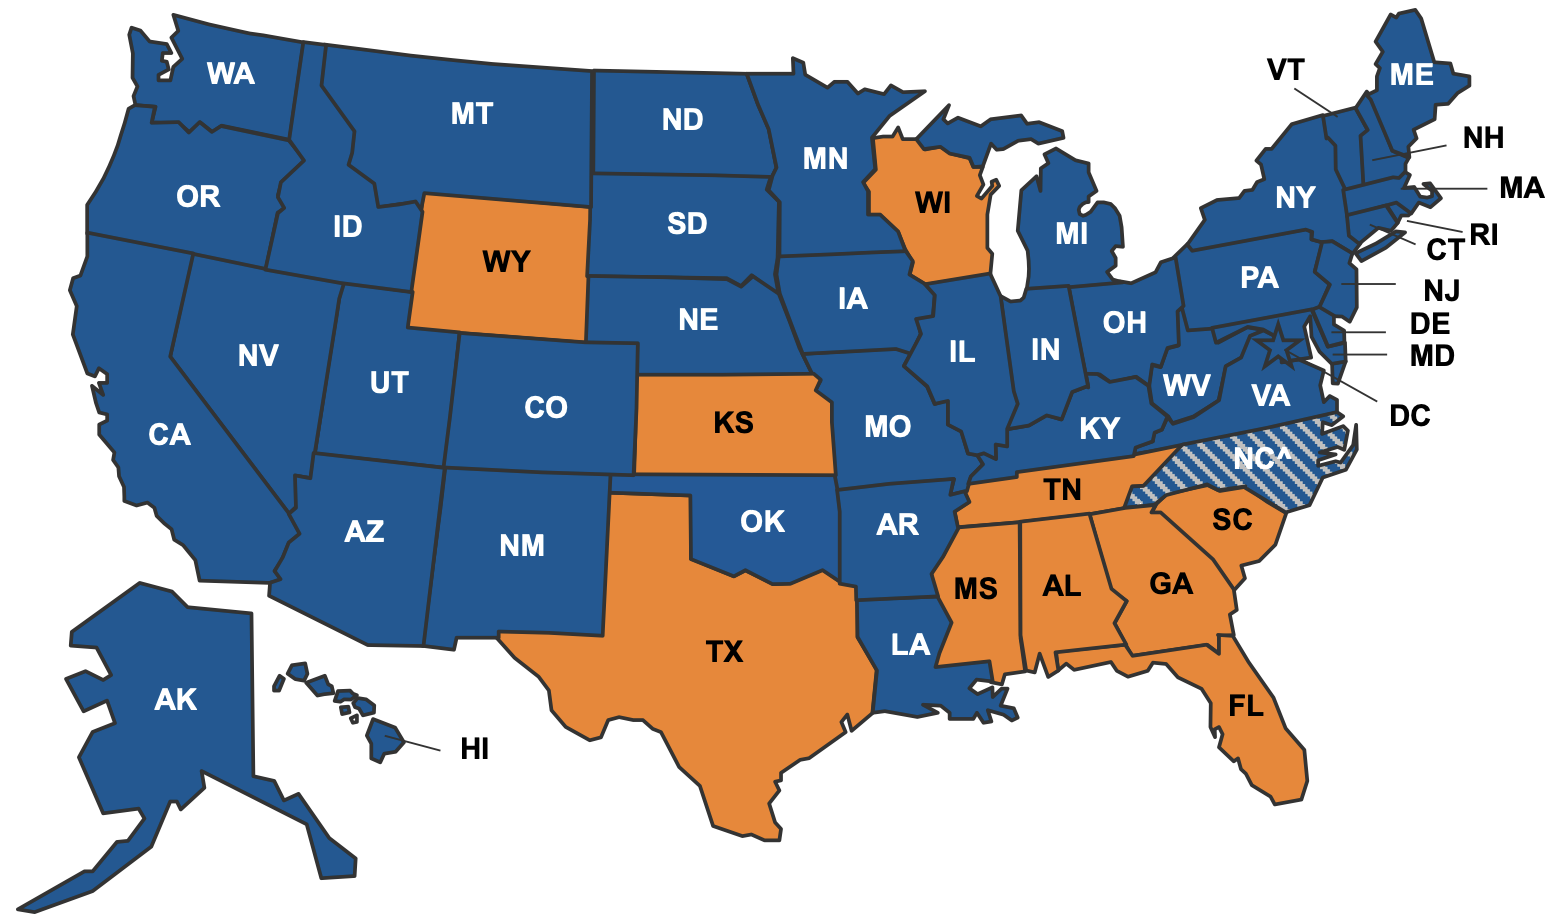 Map of the United States of America showing 2023 Medicaid Expansion adoption and implementation by state.